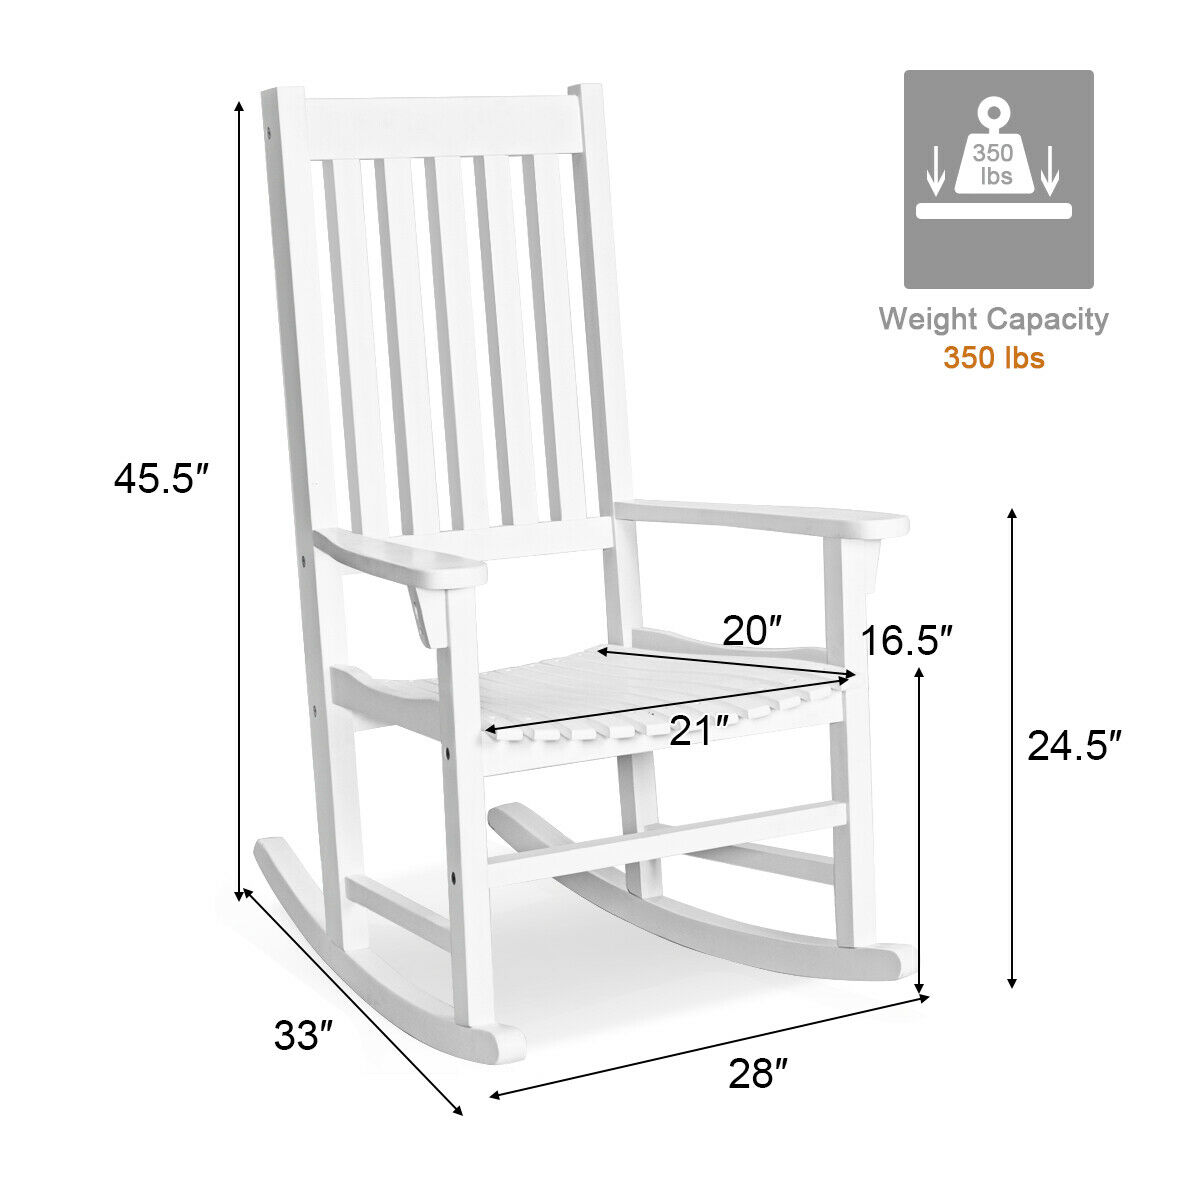 Gymax Wooden Rocking Chair Porch Rocker High Back Garden Seat For Indoor Outdoor White - image 2 of 10